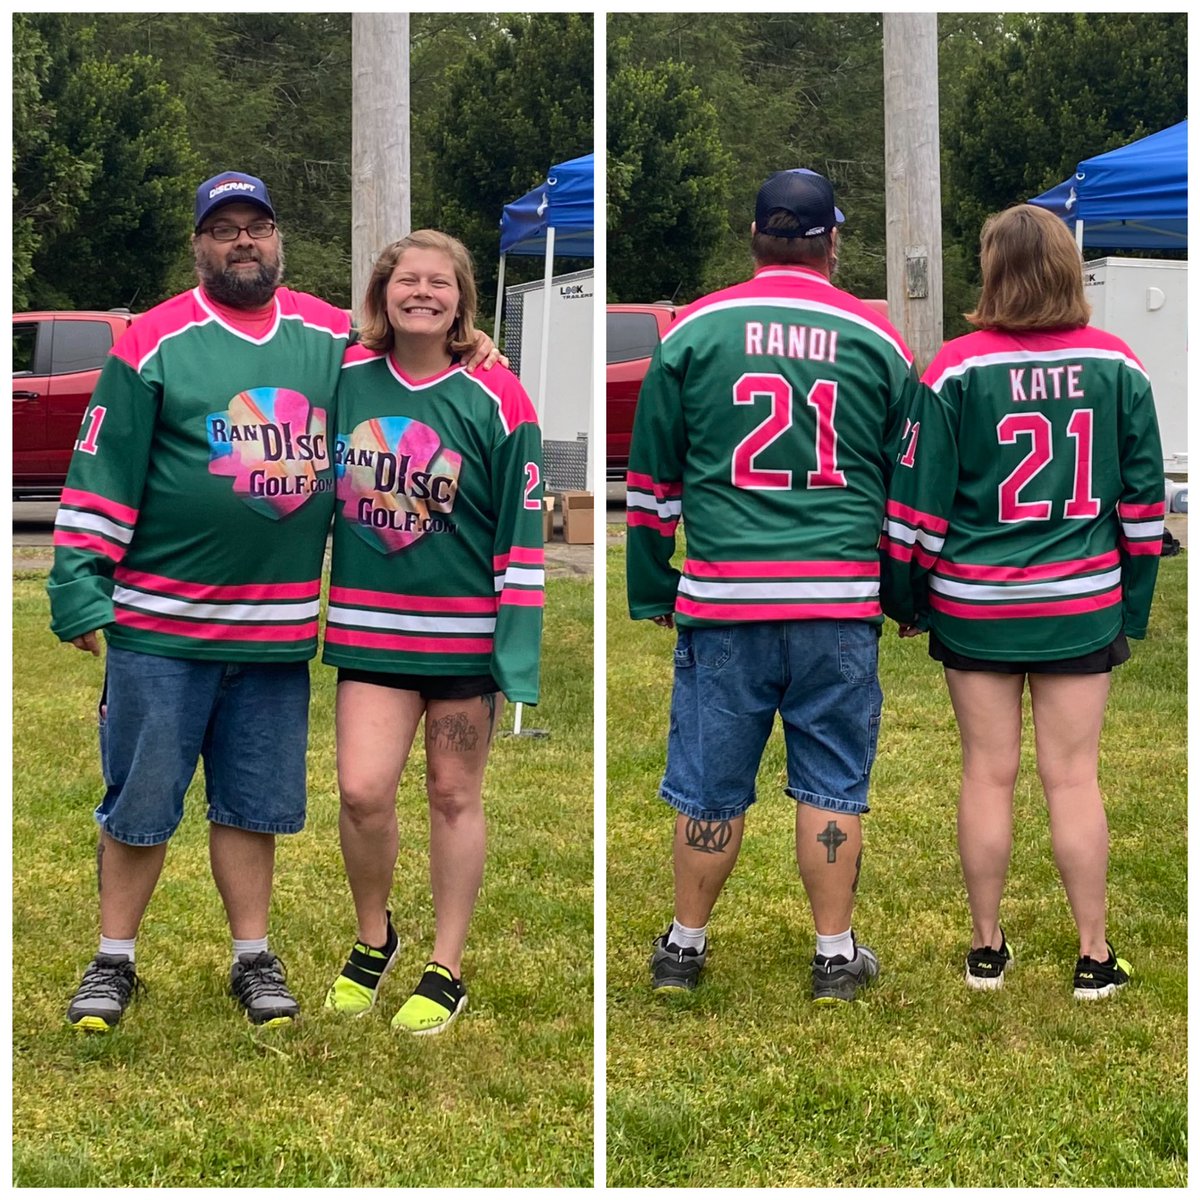 Just in case you couldn’t figure out who was who!? #discgolfcouple #married #businessowners #discgolf #frisbeegolf #nhl